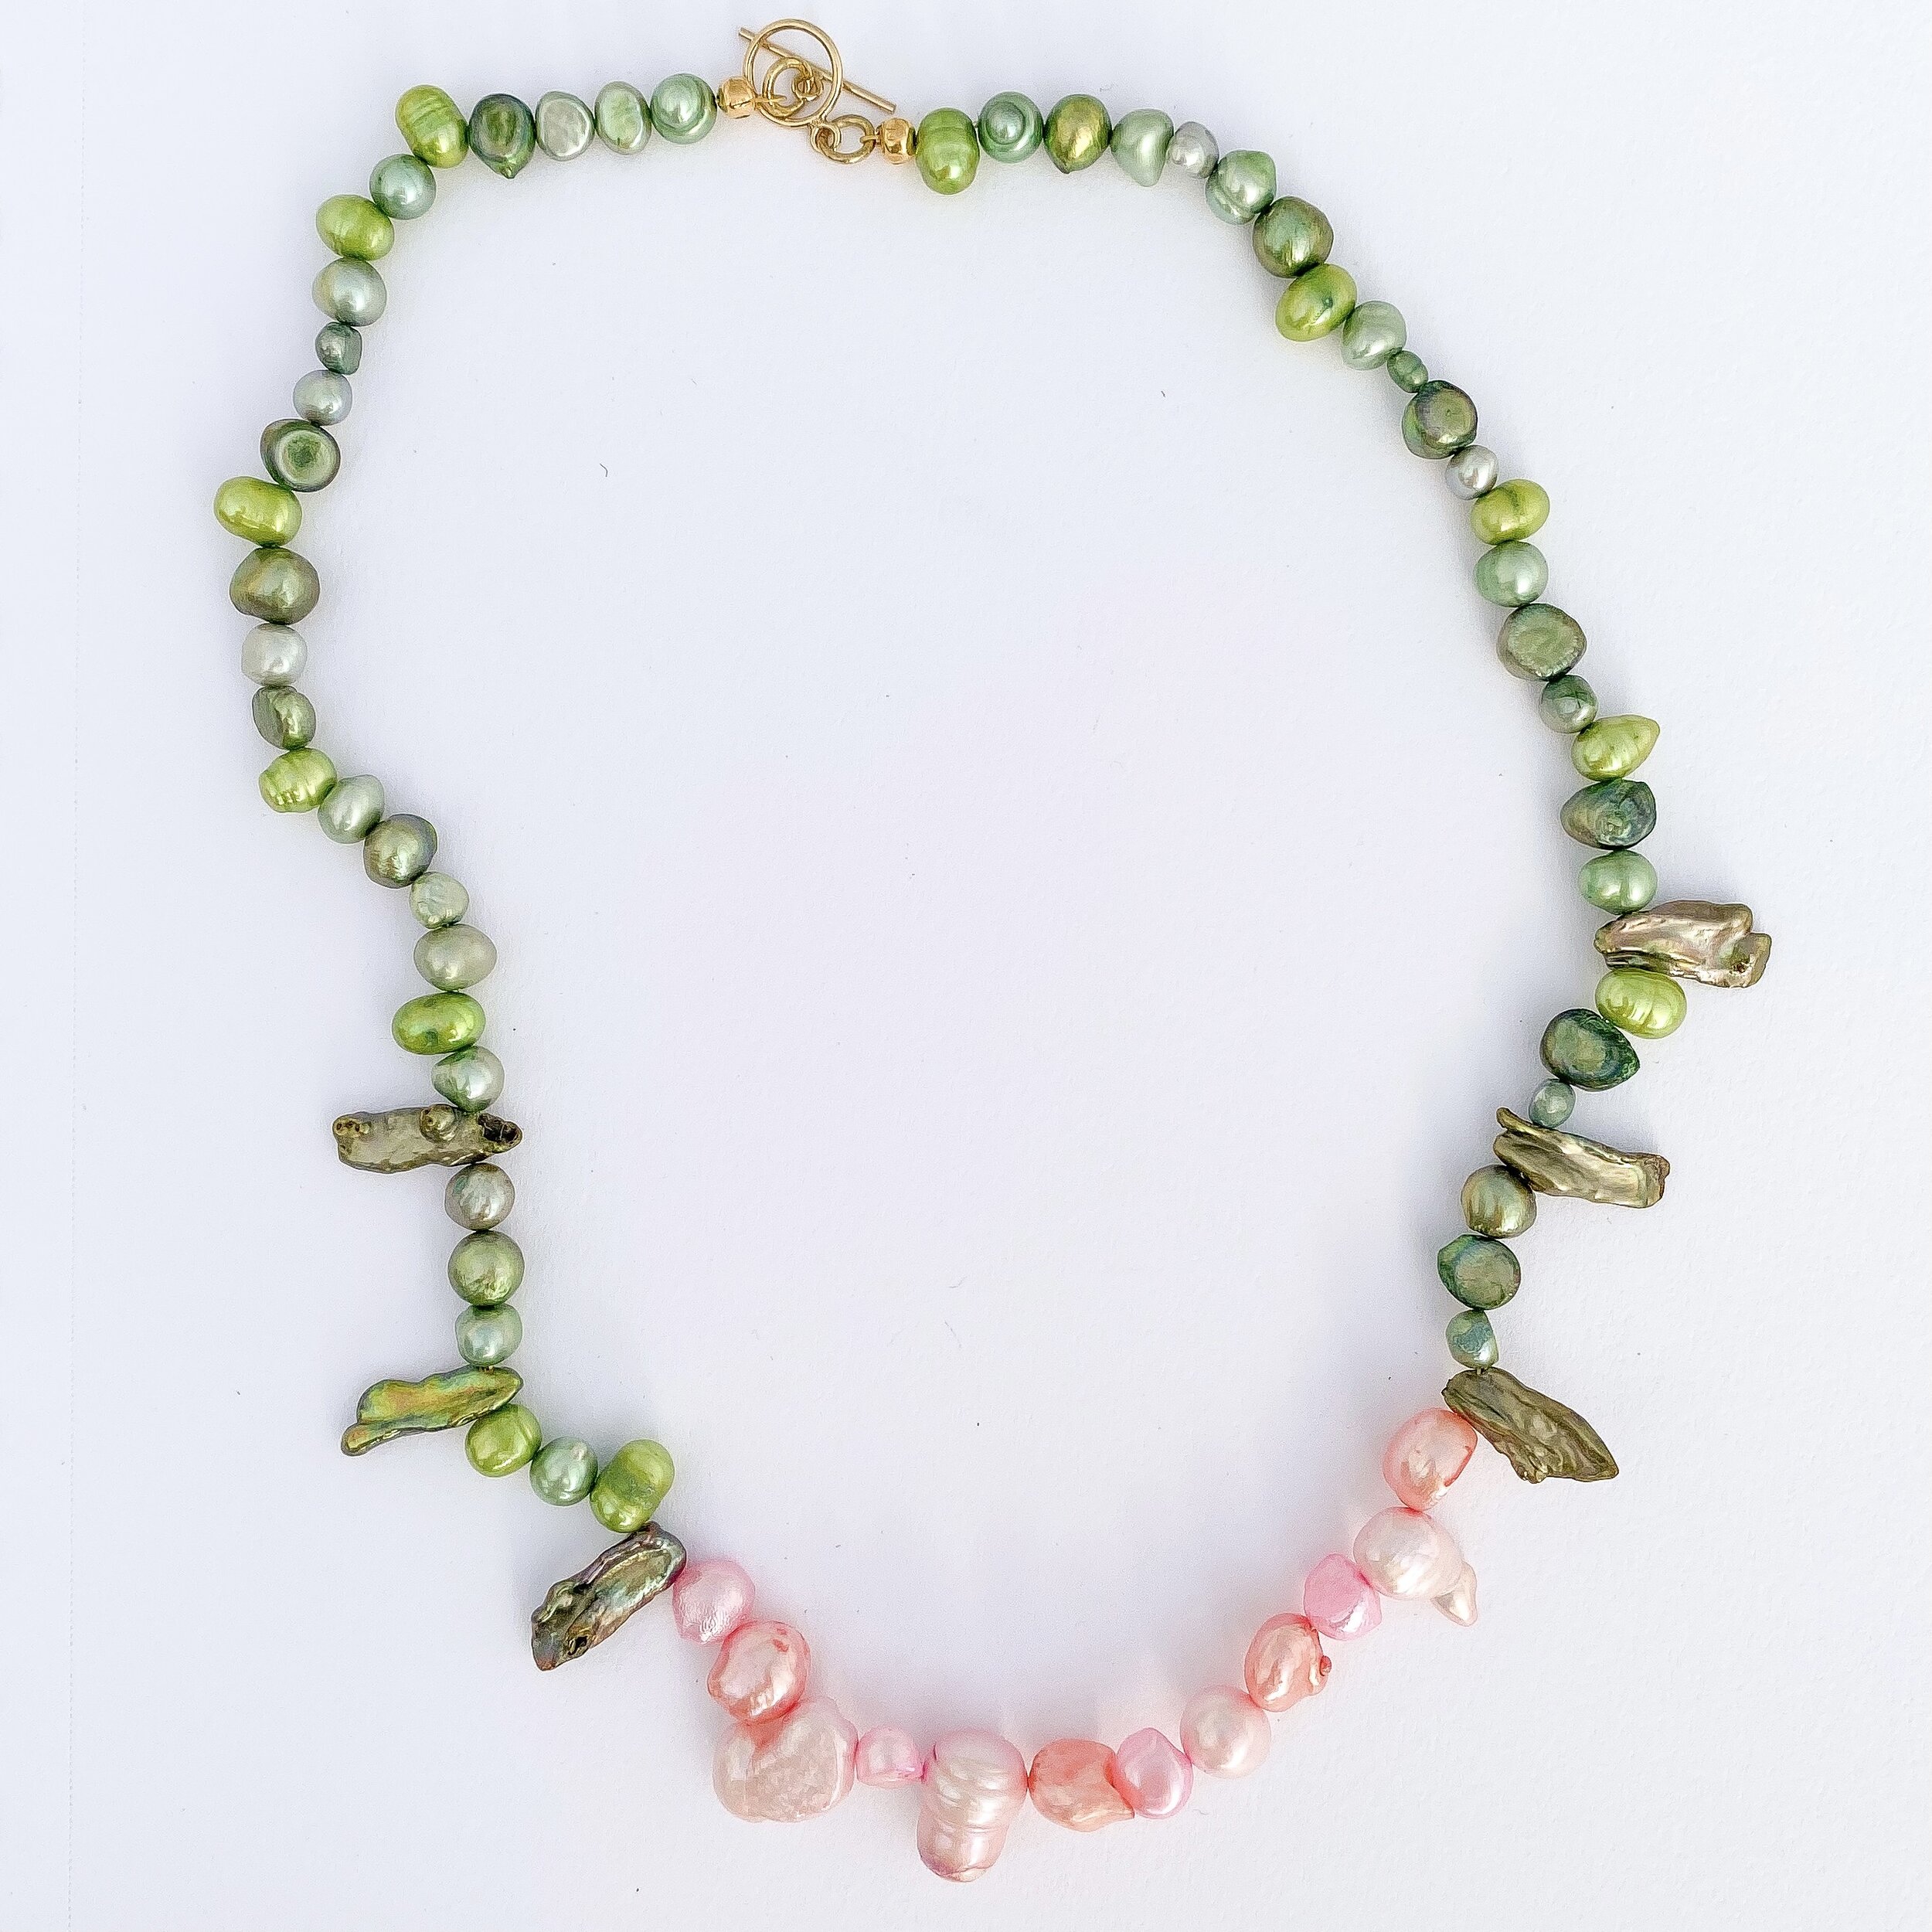  pink roses are given to show admiration of one’s refinement. pale pink ones are specifically for admiration, joy, or gentleness. i’ve been known to give myself a bouquet from time to time. freshwater pearls, gold-filled toggle clasp. 